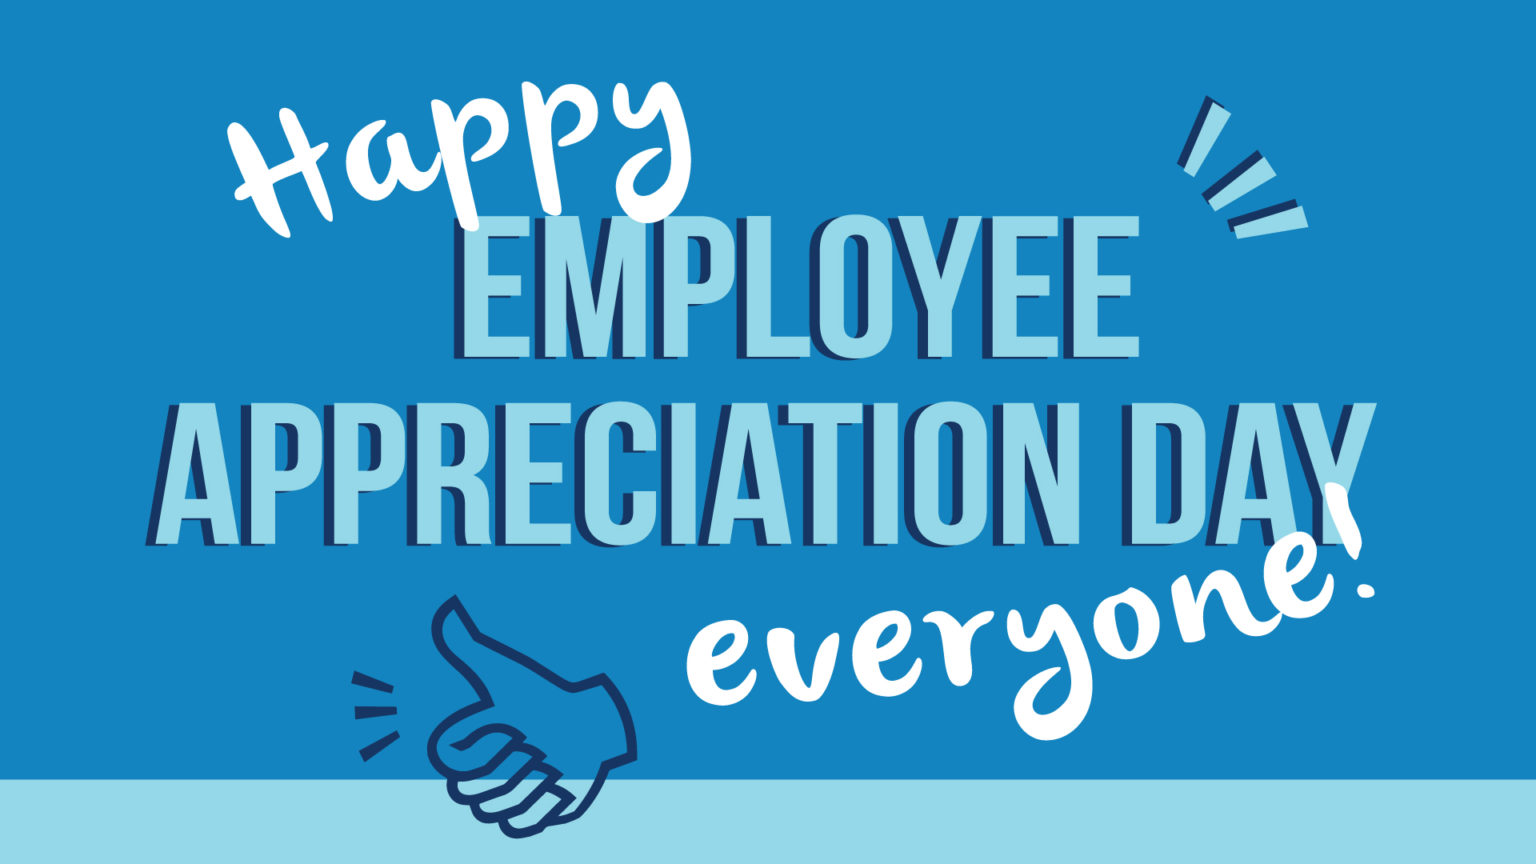 We Appreciate Our Employees! Kirson & Fuller